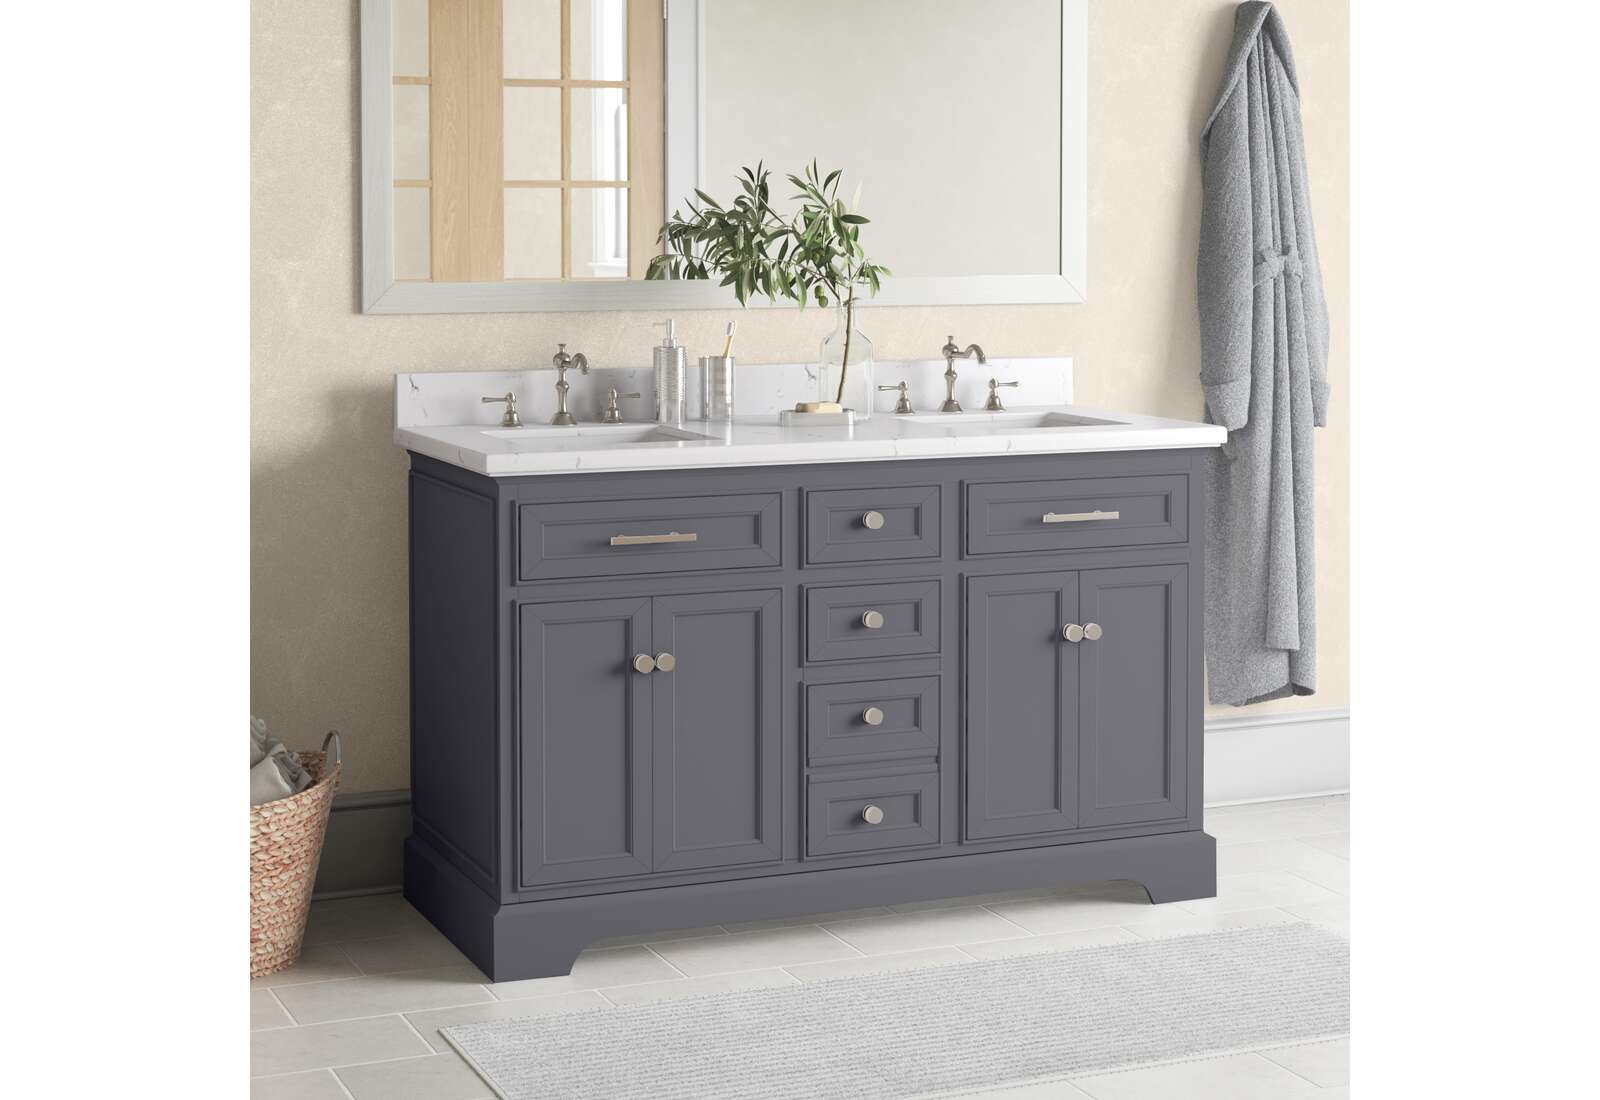 Bathroom Vanity Sizes: 4 Steps to Find the Best Fit for Your Space